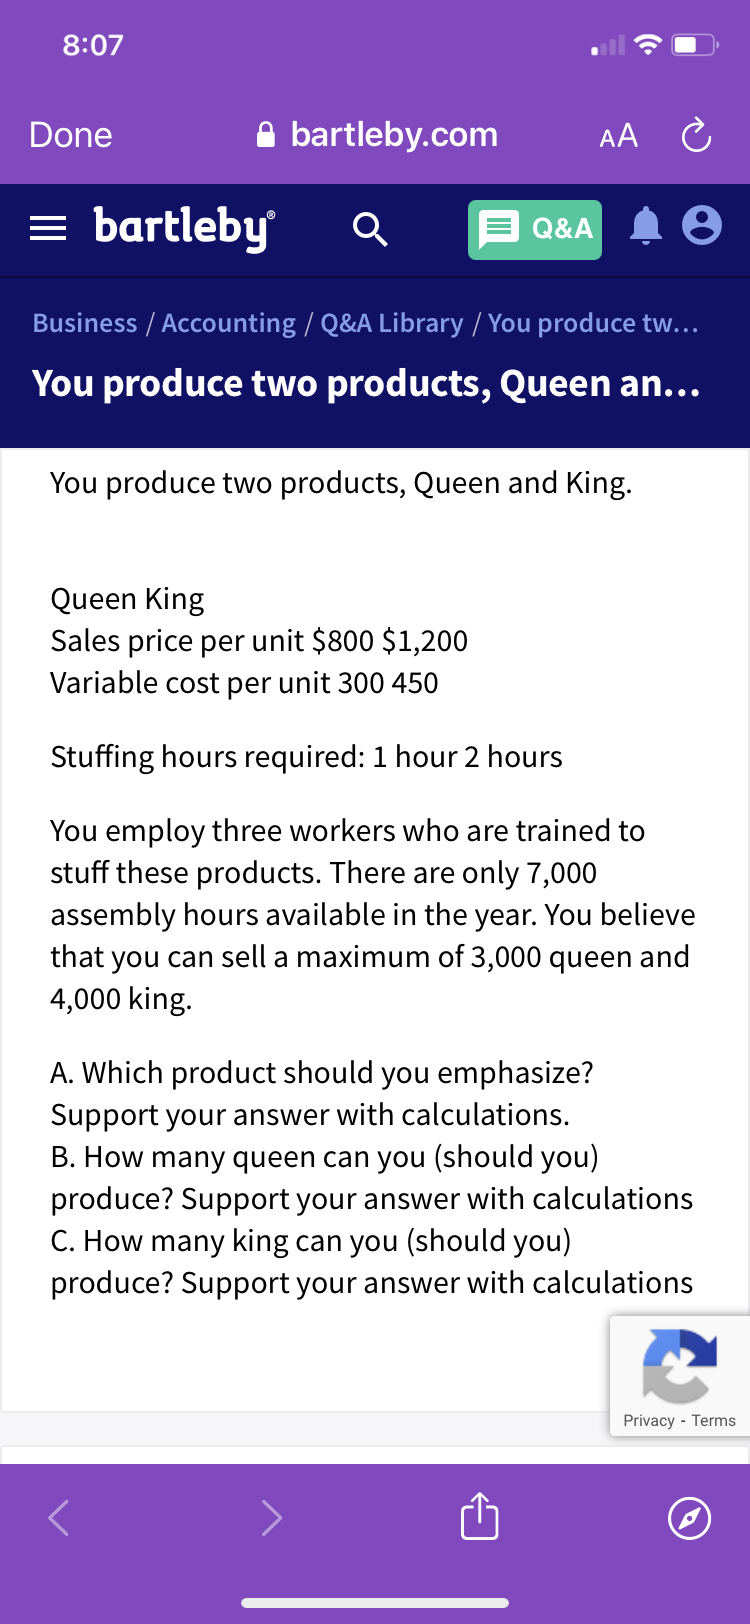 8:07
Done
A bartleby.com
AA C
= bartleby
Q&A
Business / Accounting / Q&A Library / You produce tw...
You produce two products, Queen an...
You produce two products, Queen and King.
Queen King
Sales price per unit $800 $1,200
Variable cost per unit 300 450
Stuffing hours required: 1 hour 2 hours
You employ three workers who are trained to
stuff these products. There are only 7,000
assembly hours available in the year. You believe
that you can sell a maximum of 3,000 queen and
4,000 king.
A. Which product should you emphasize?
Support your answer with calculations.
B. How many queen can you (should you)
produce? Support your answer with calculations
C. How many king can you (should you)
produce? Support your answer with calculations
Privacy - Terms
